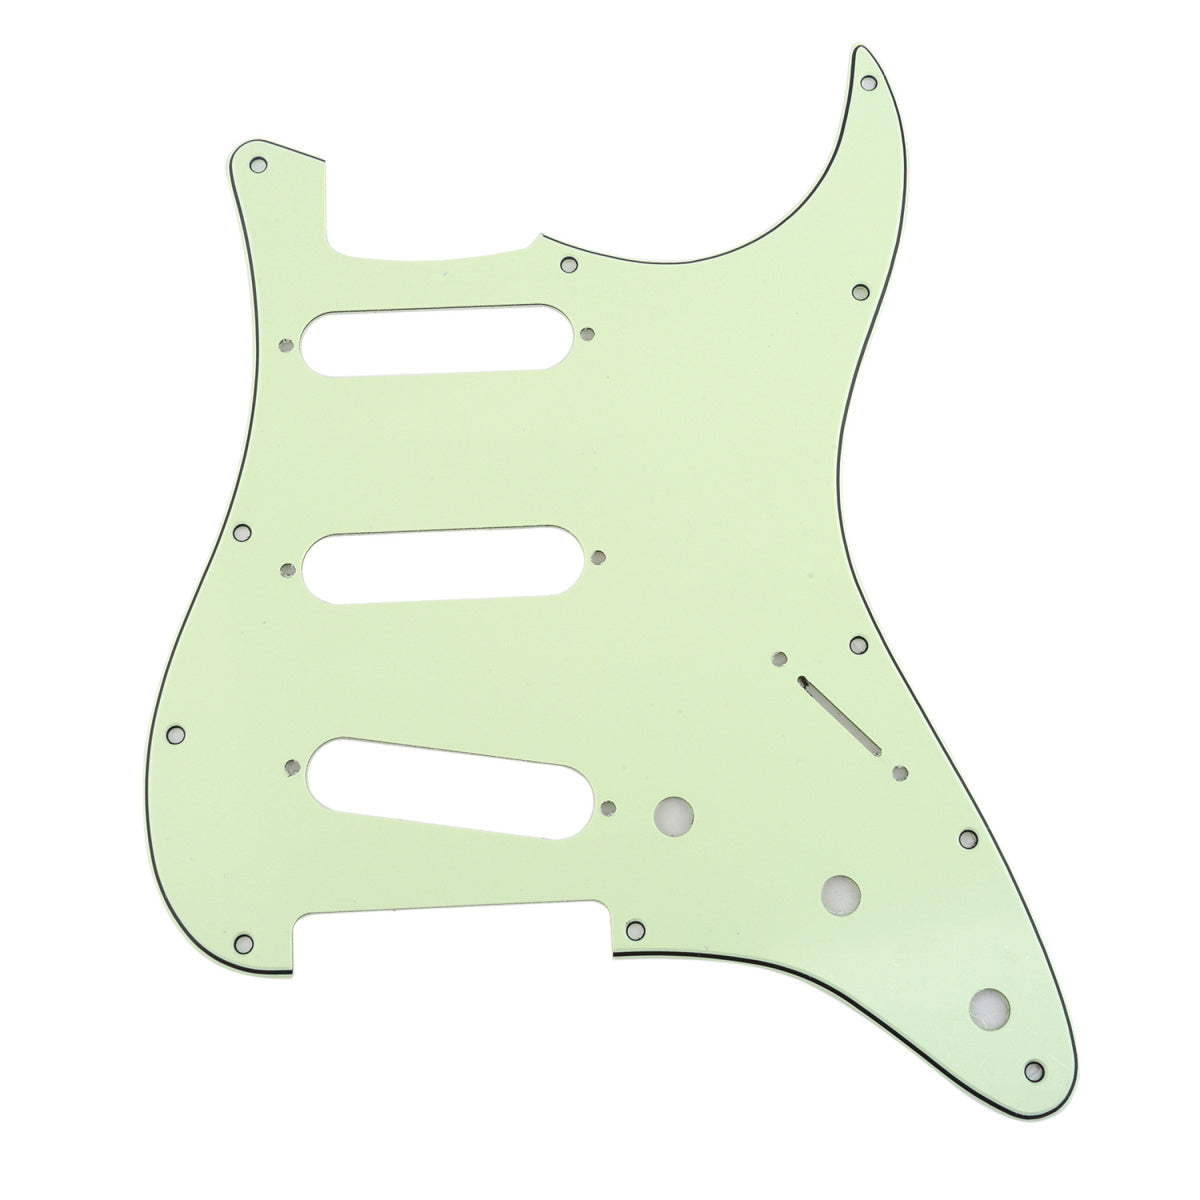 Musiclily SSS 11 Hole Strat Guitar Pickguard for Fender USA/Mexican Made Standard Stratocaster Modern Style, 3Ply Mint